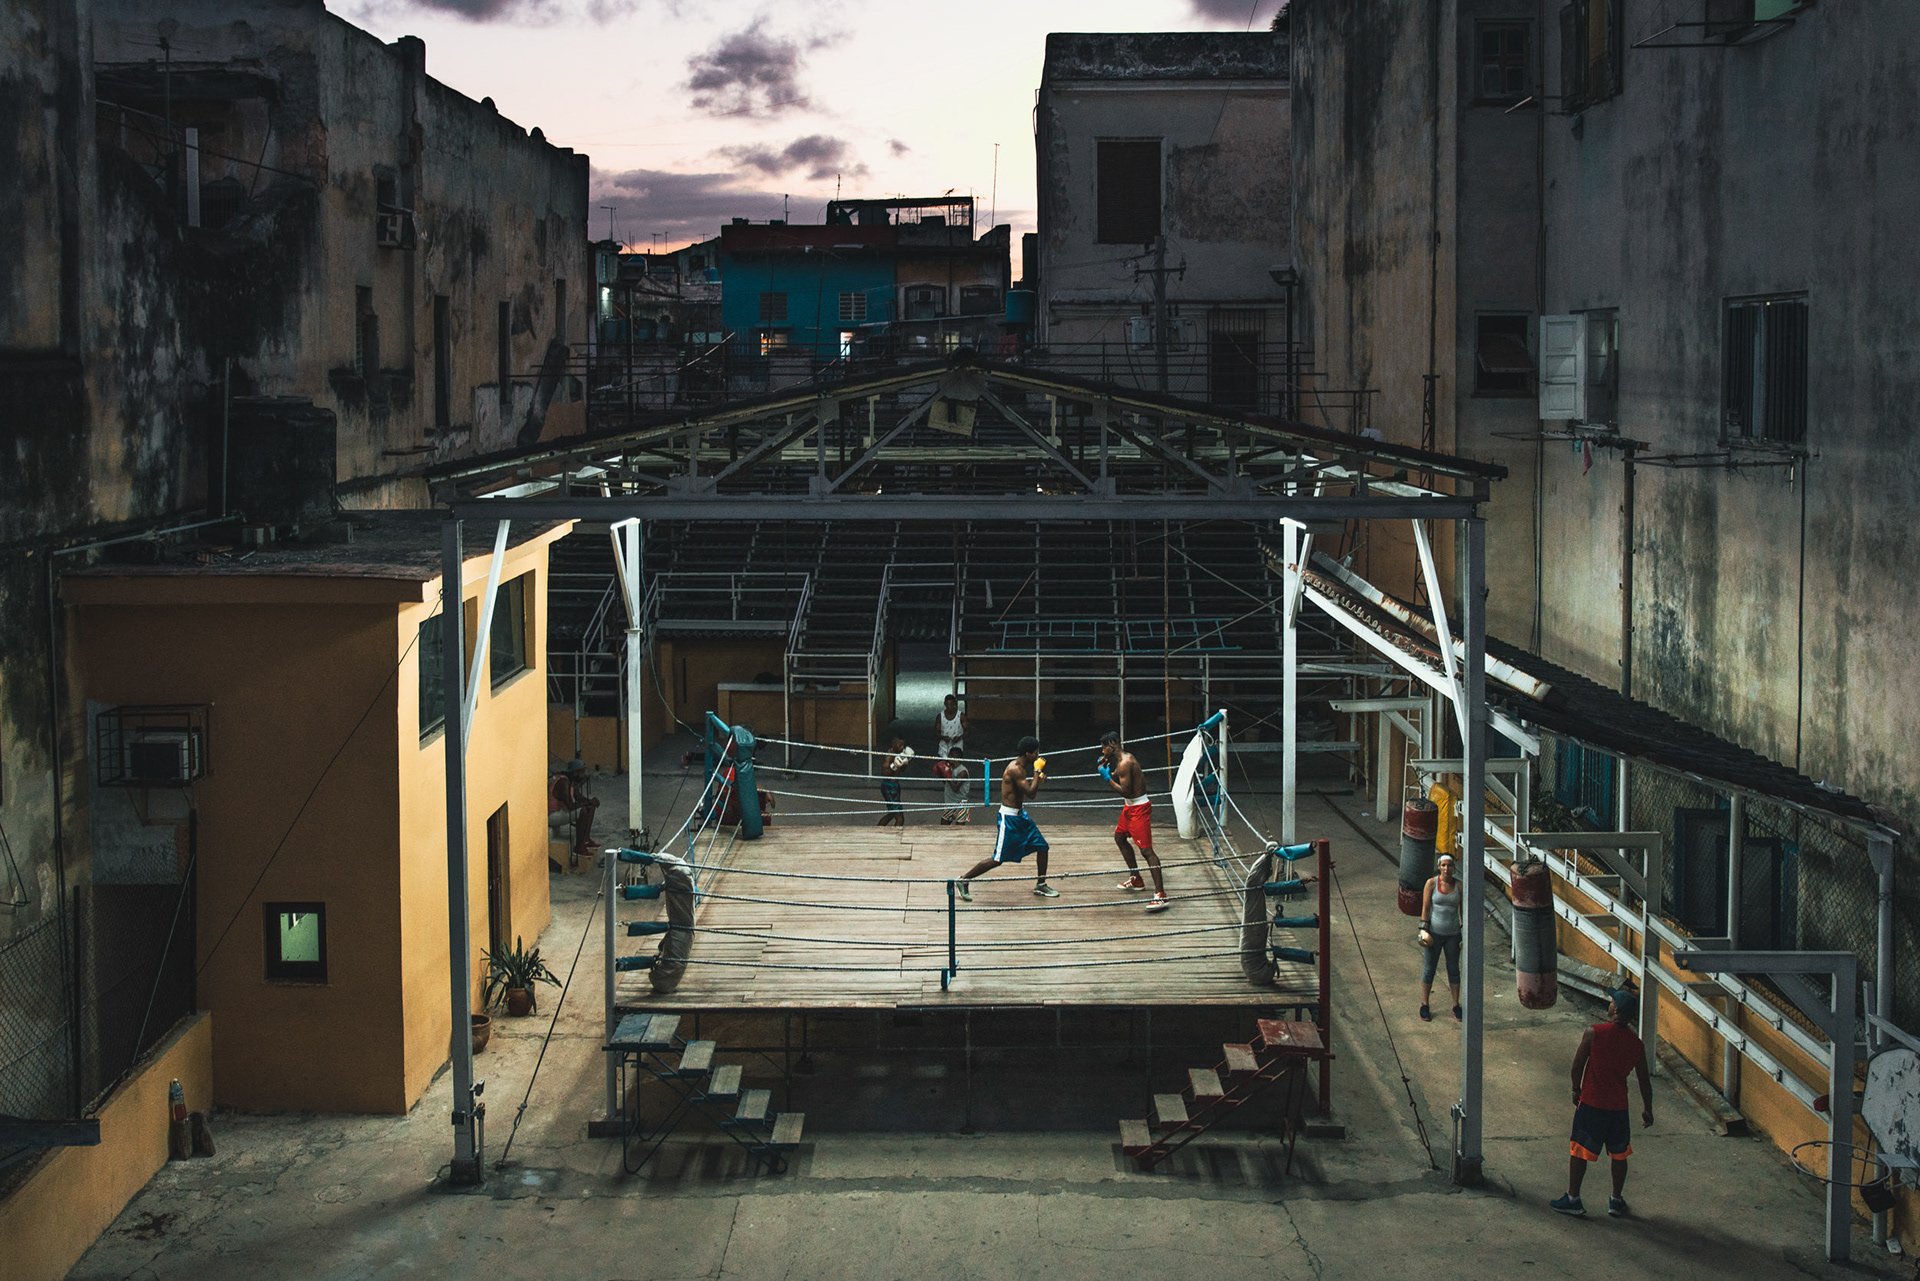 Photographing Inside Cuba's Legendary Boxing Gym